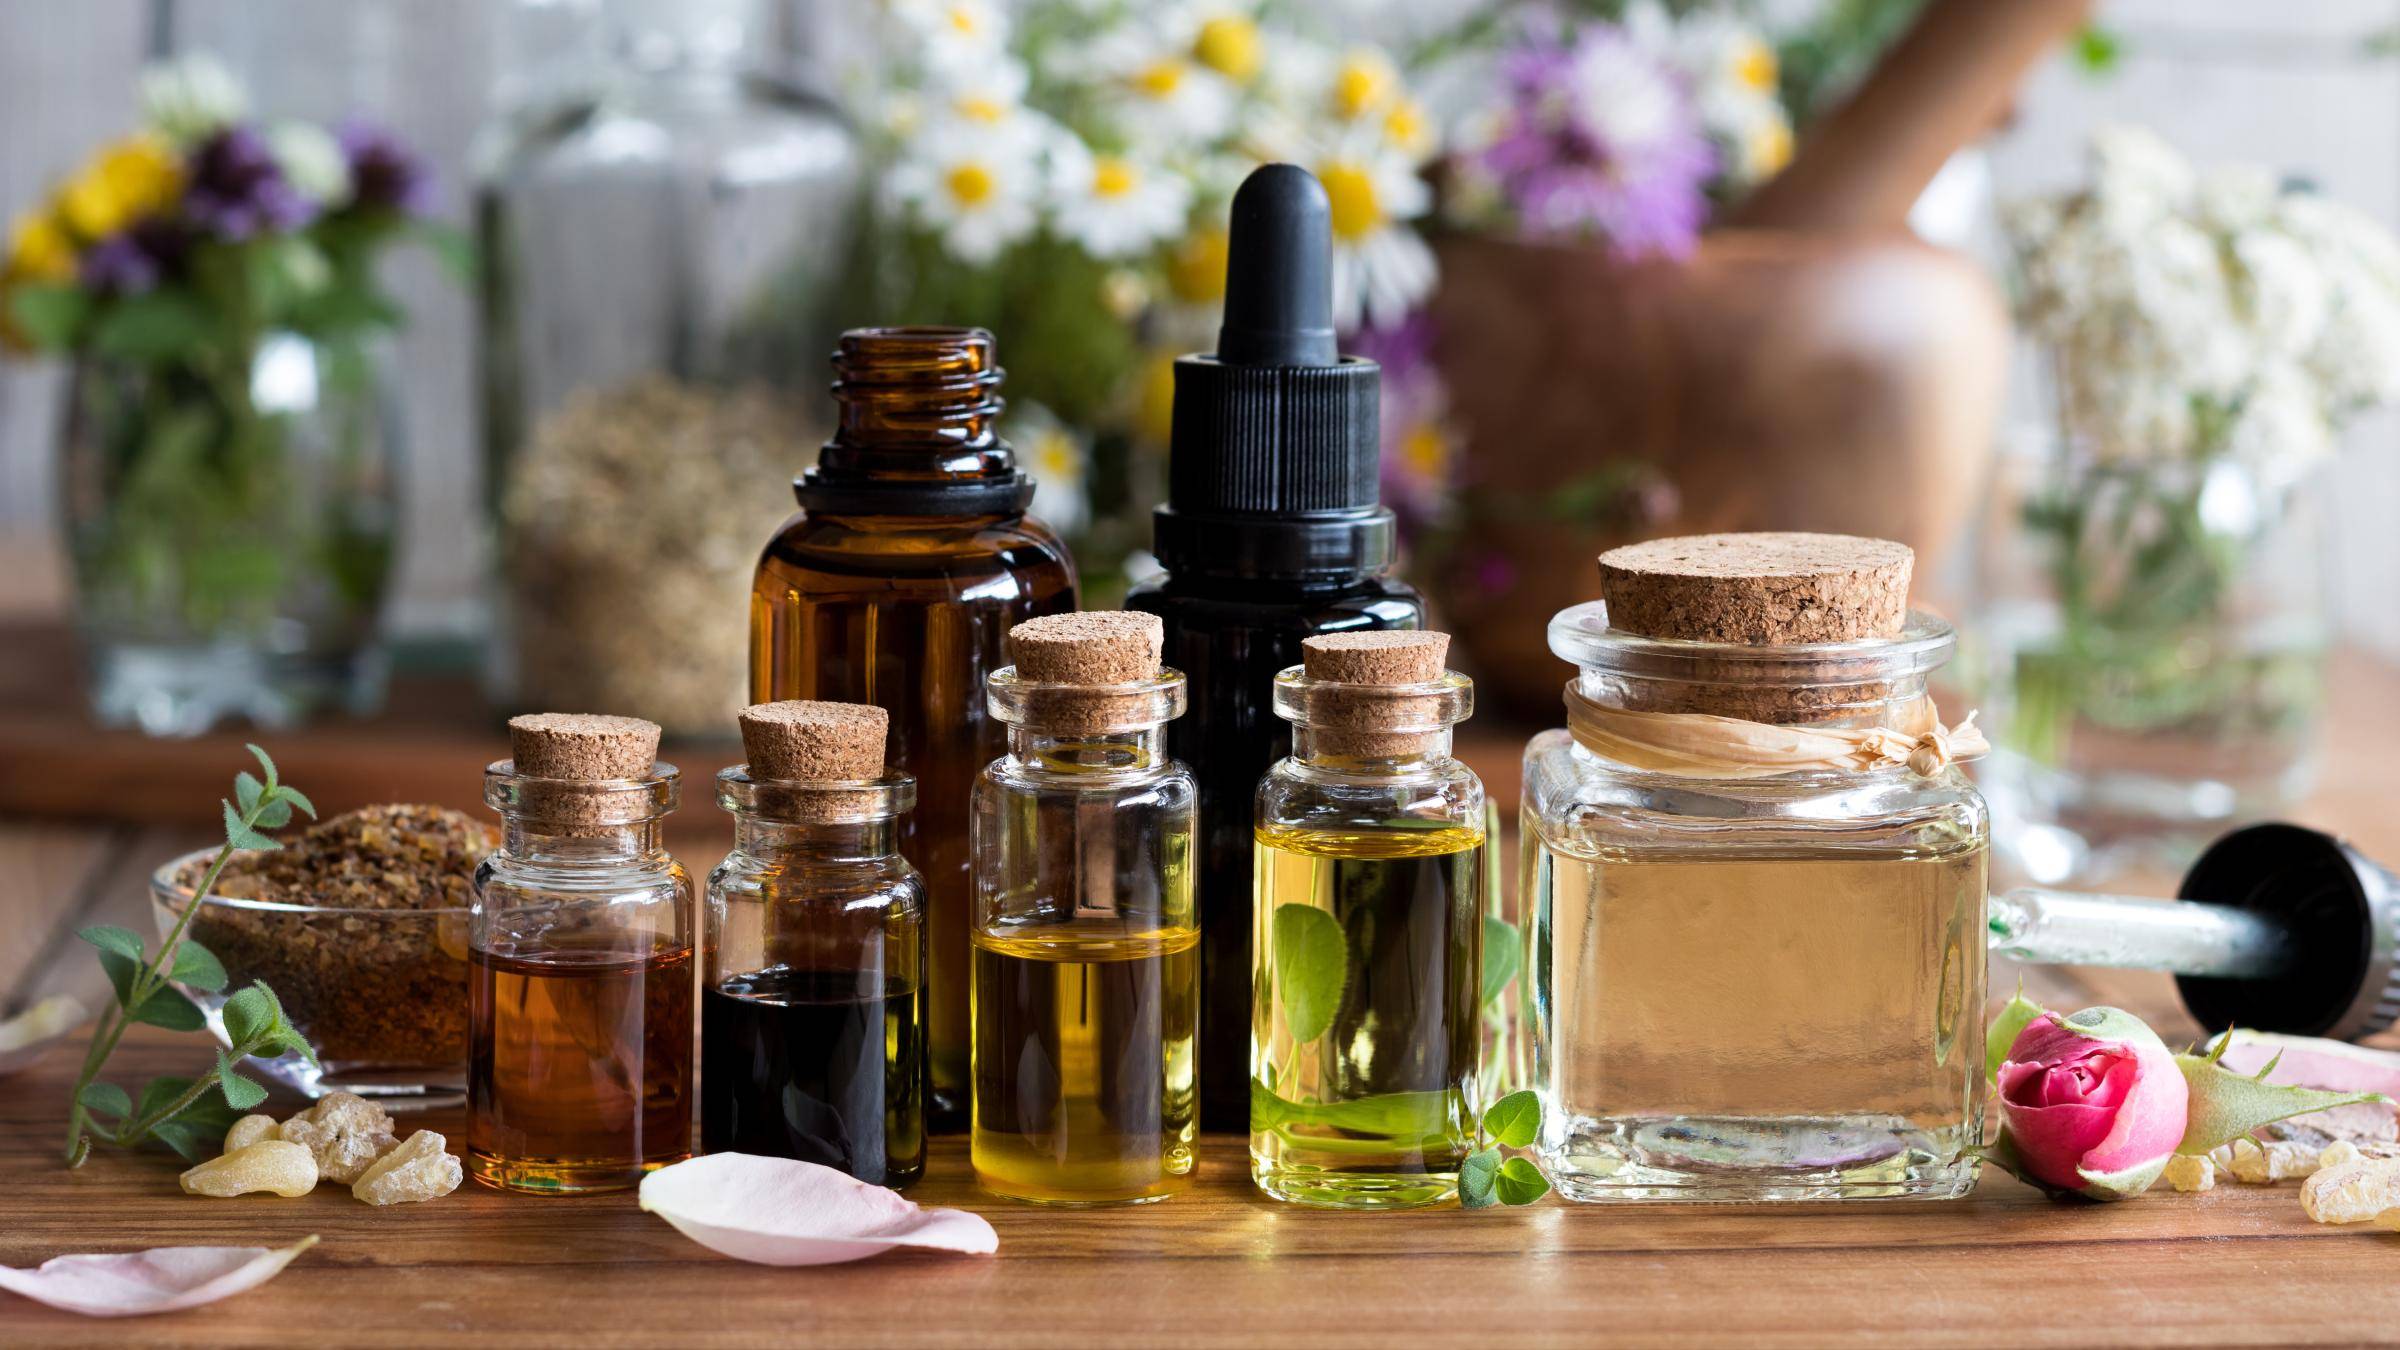 Combining Essential Oils Into Your Day to Improve Your Mood